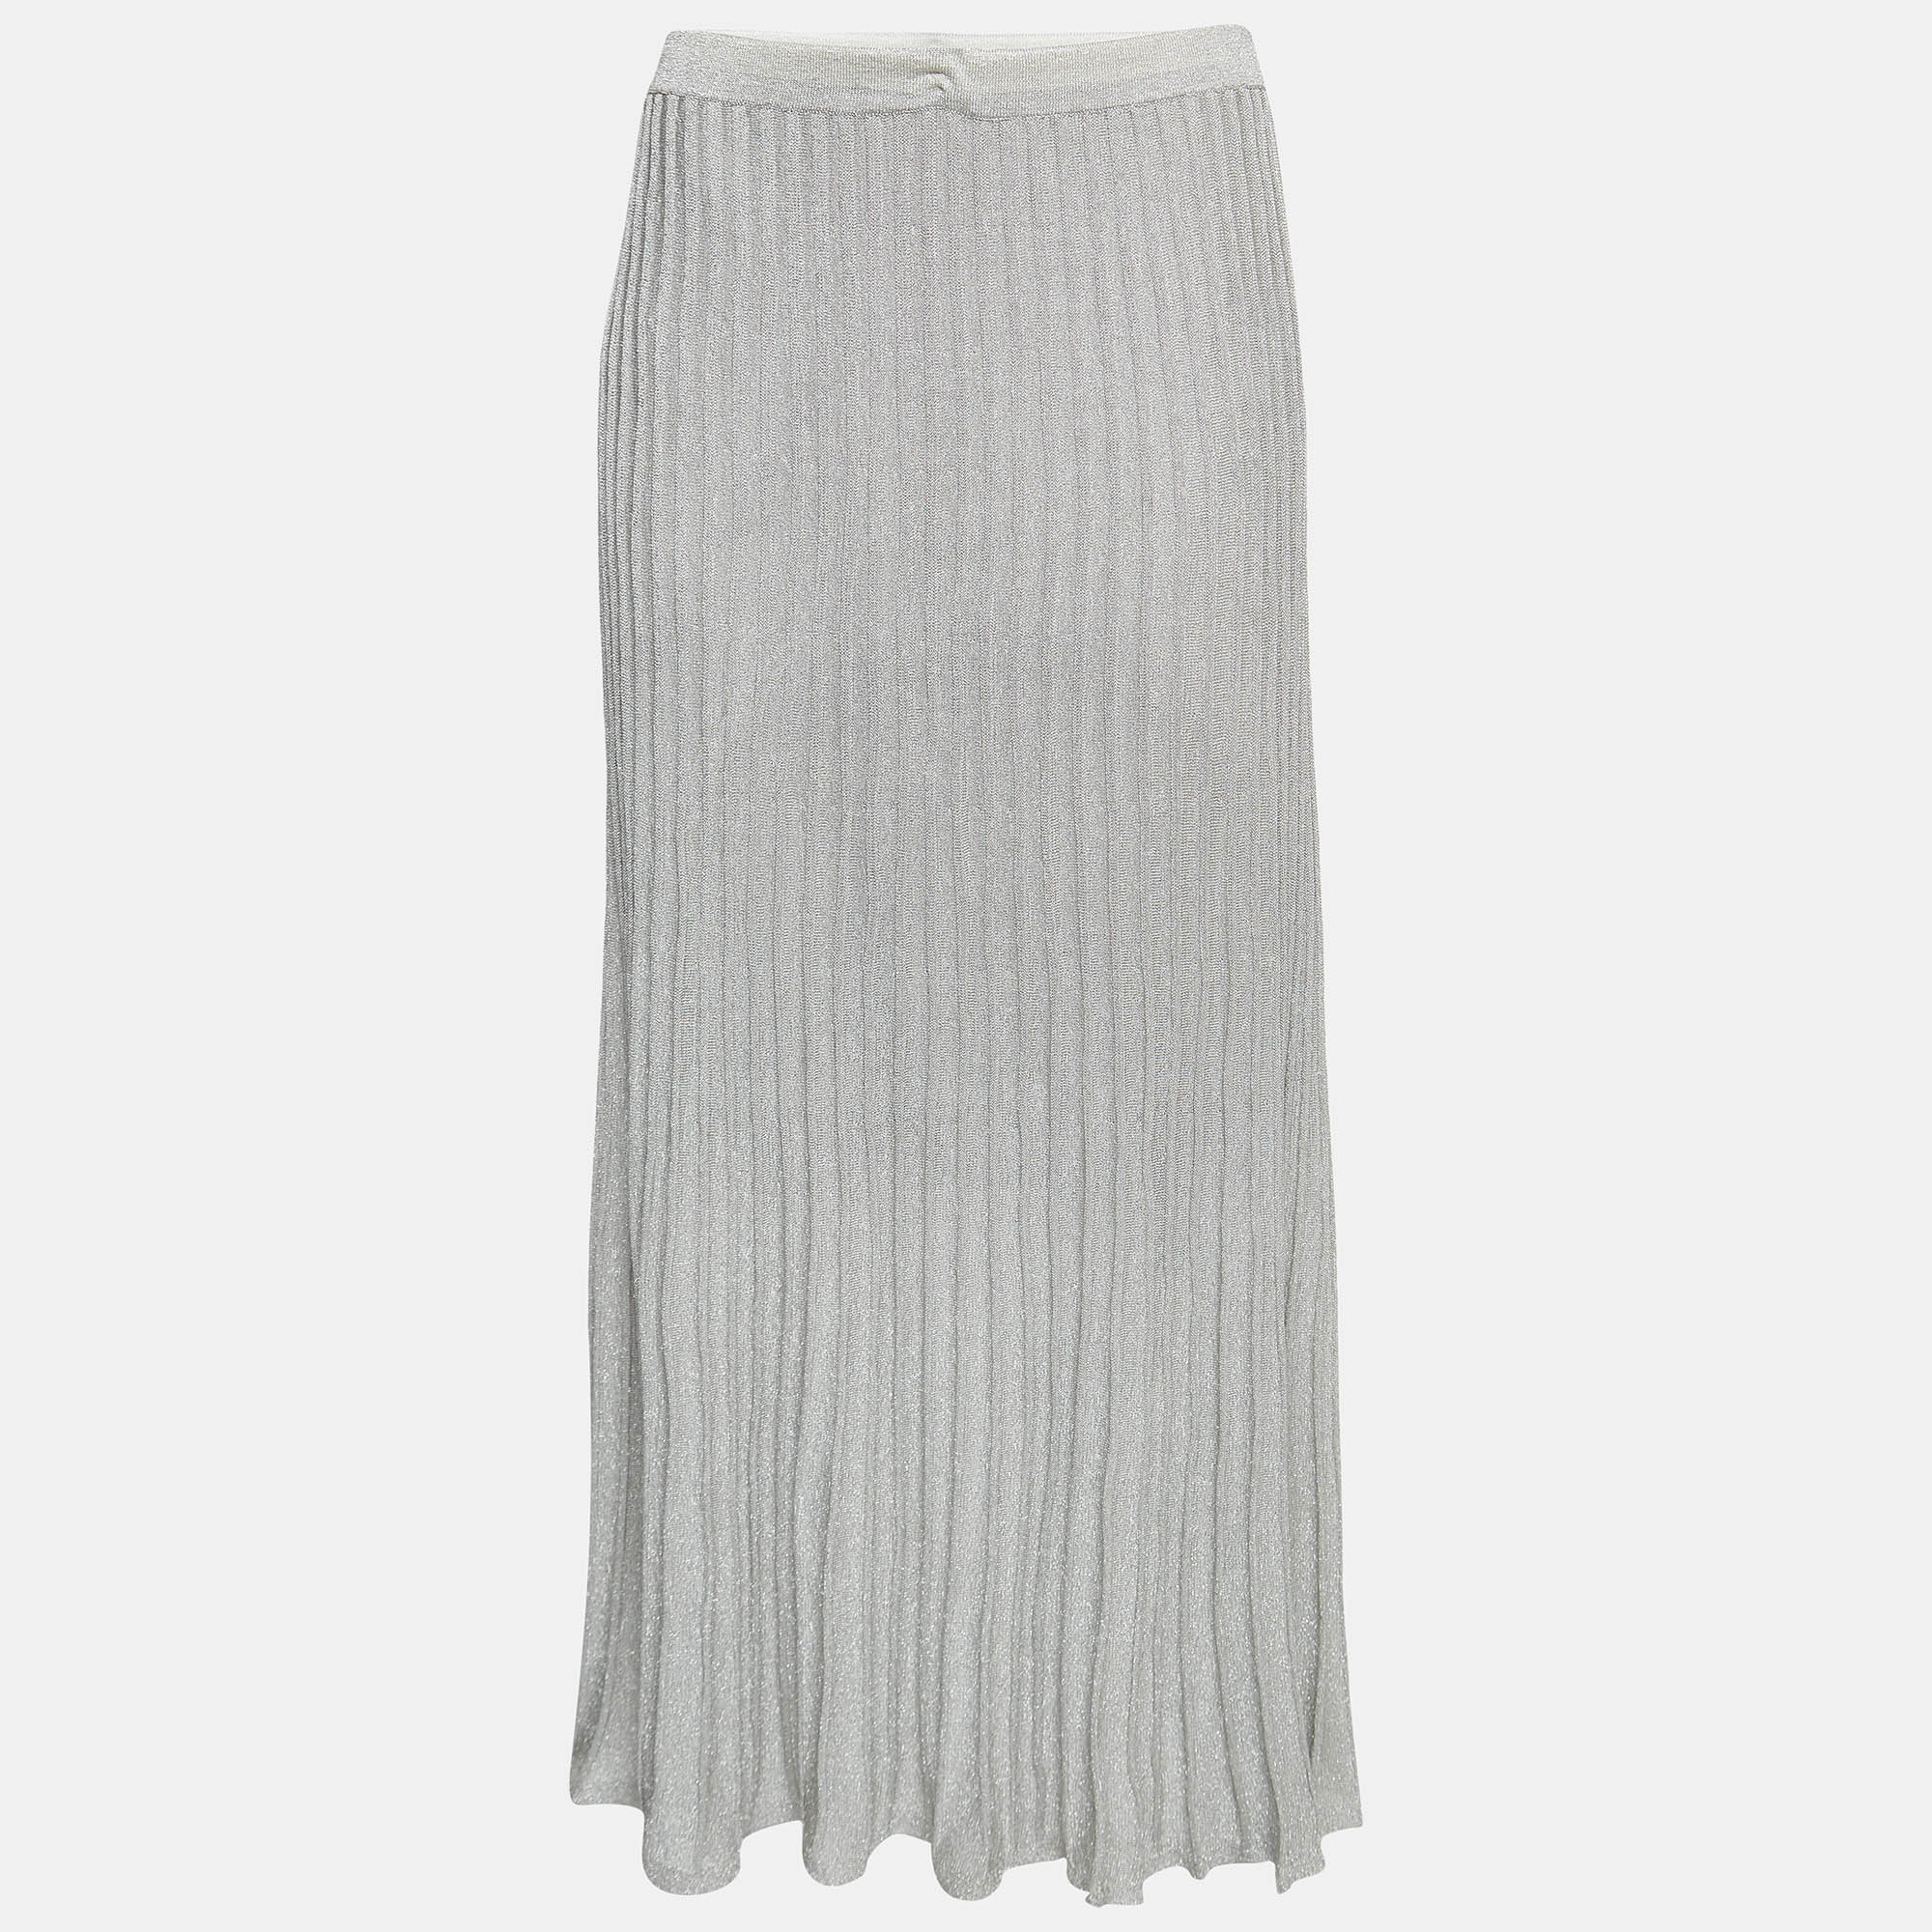 Sandro silver shimmer effect synthetic pleated midi skirt s